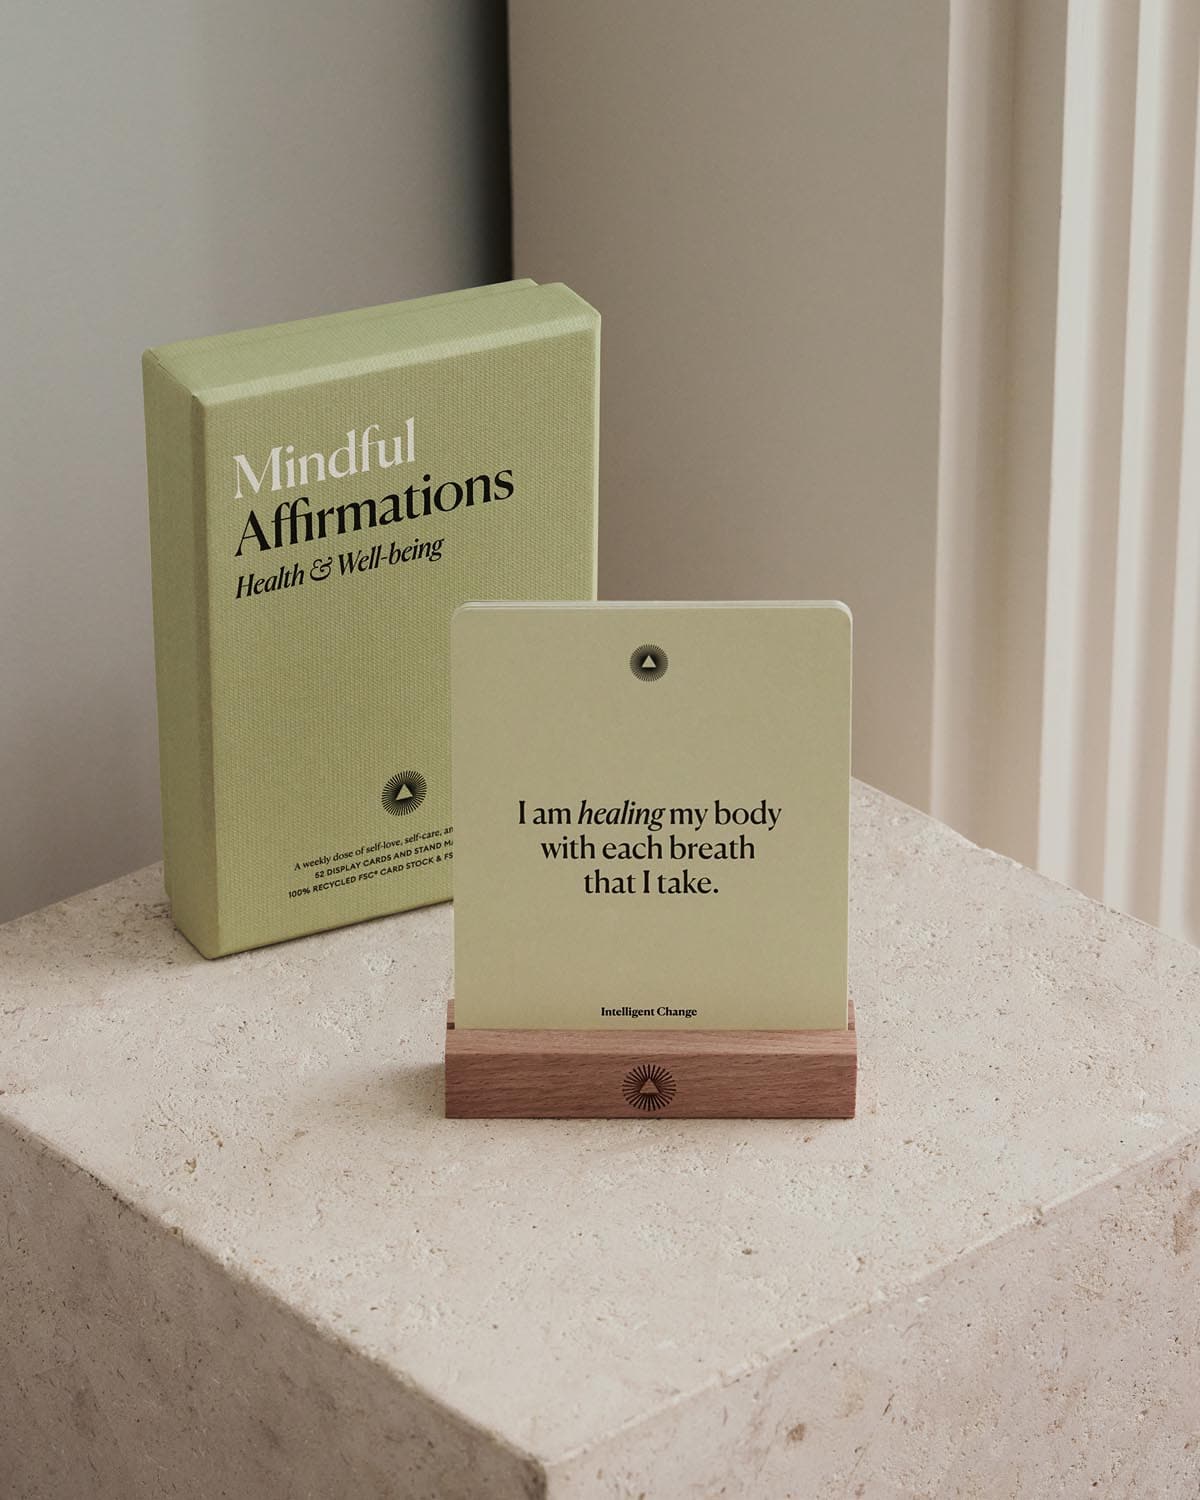 Mindful Affirmations for Health & Wellbeing by Intelligent Change